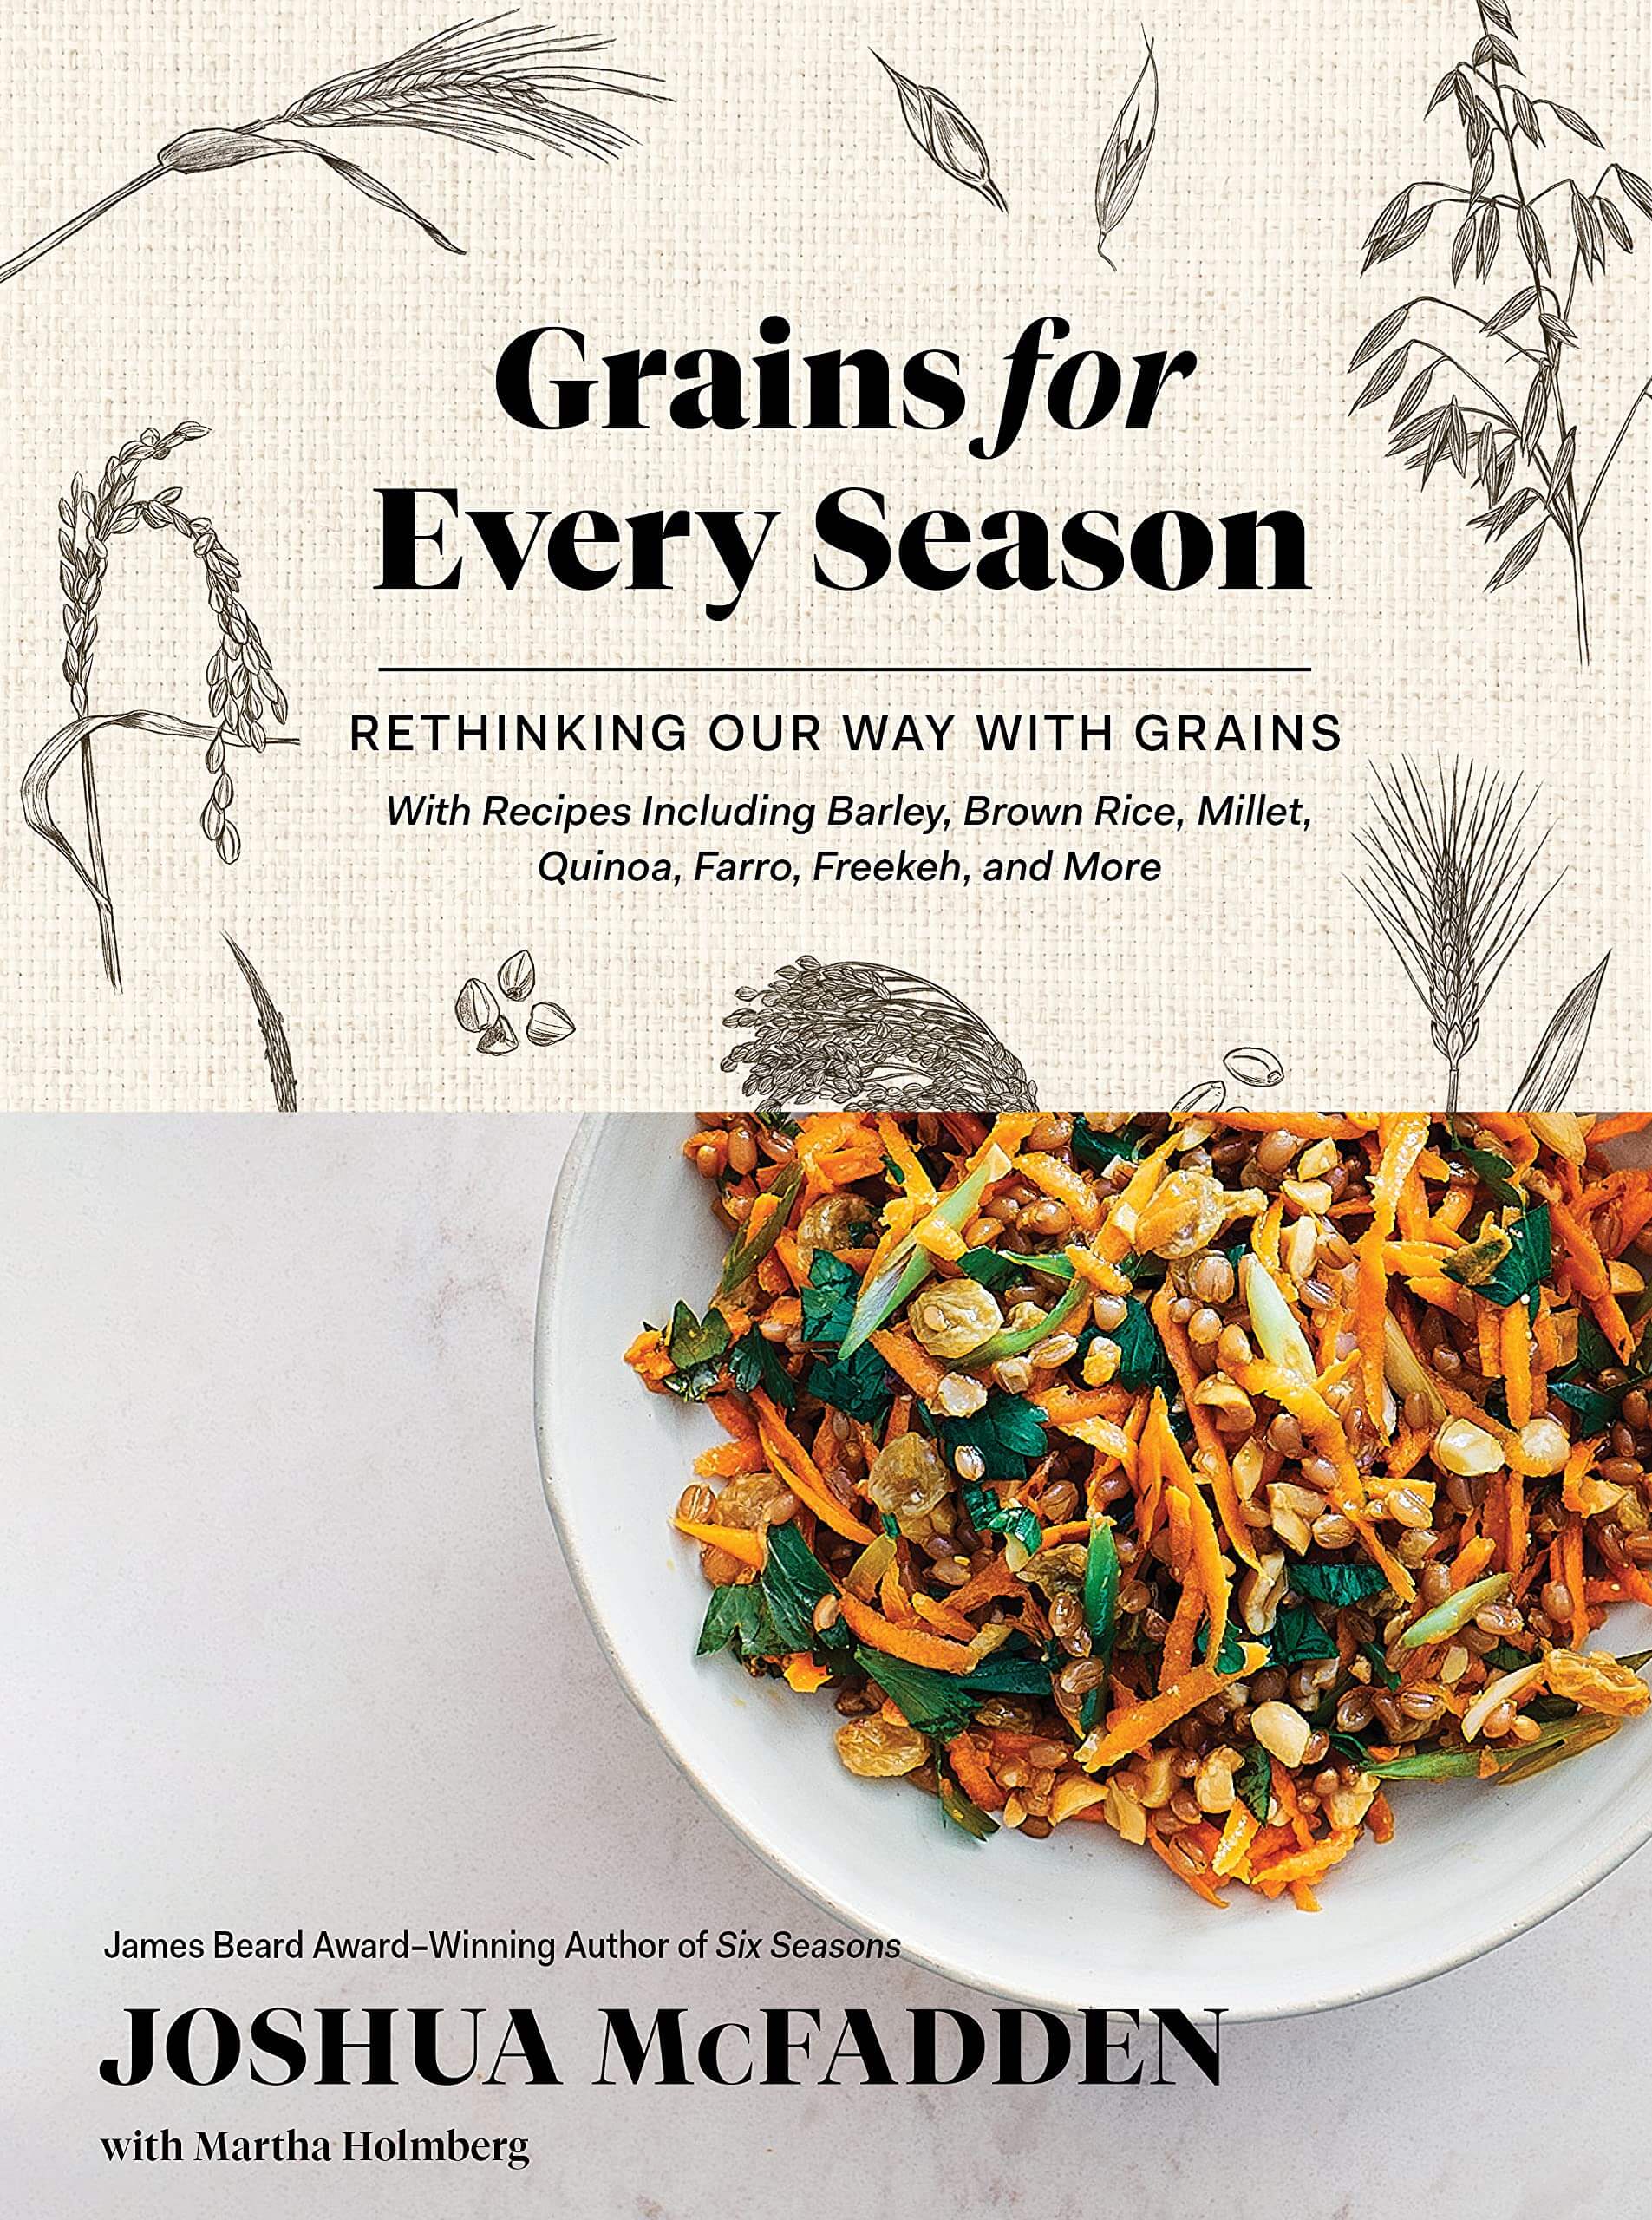 COOK THE BOOKS: “Grains for Every Season” by Joshua McFadden